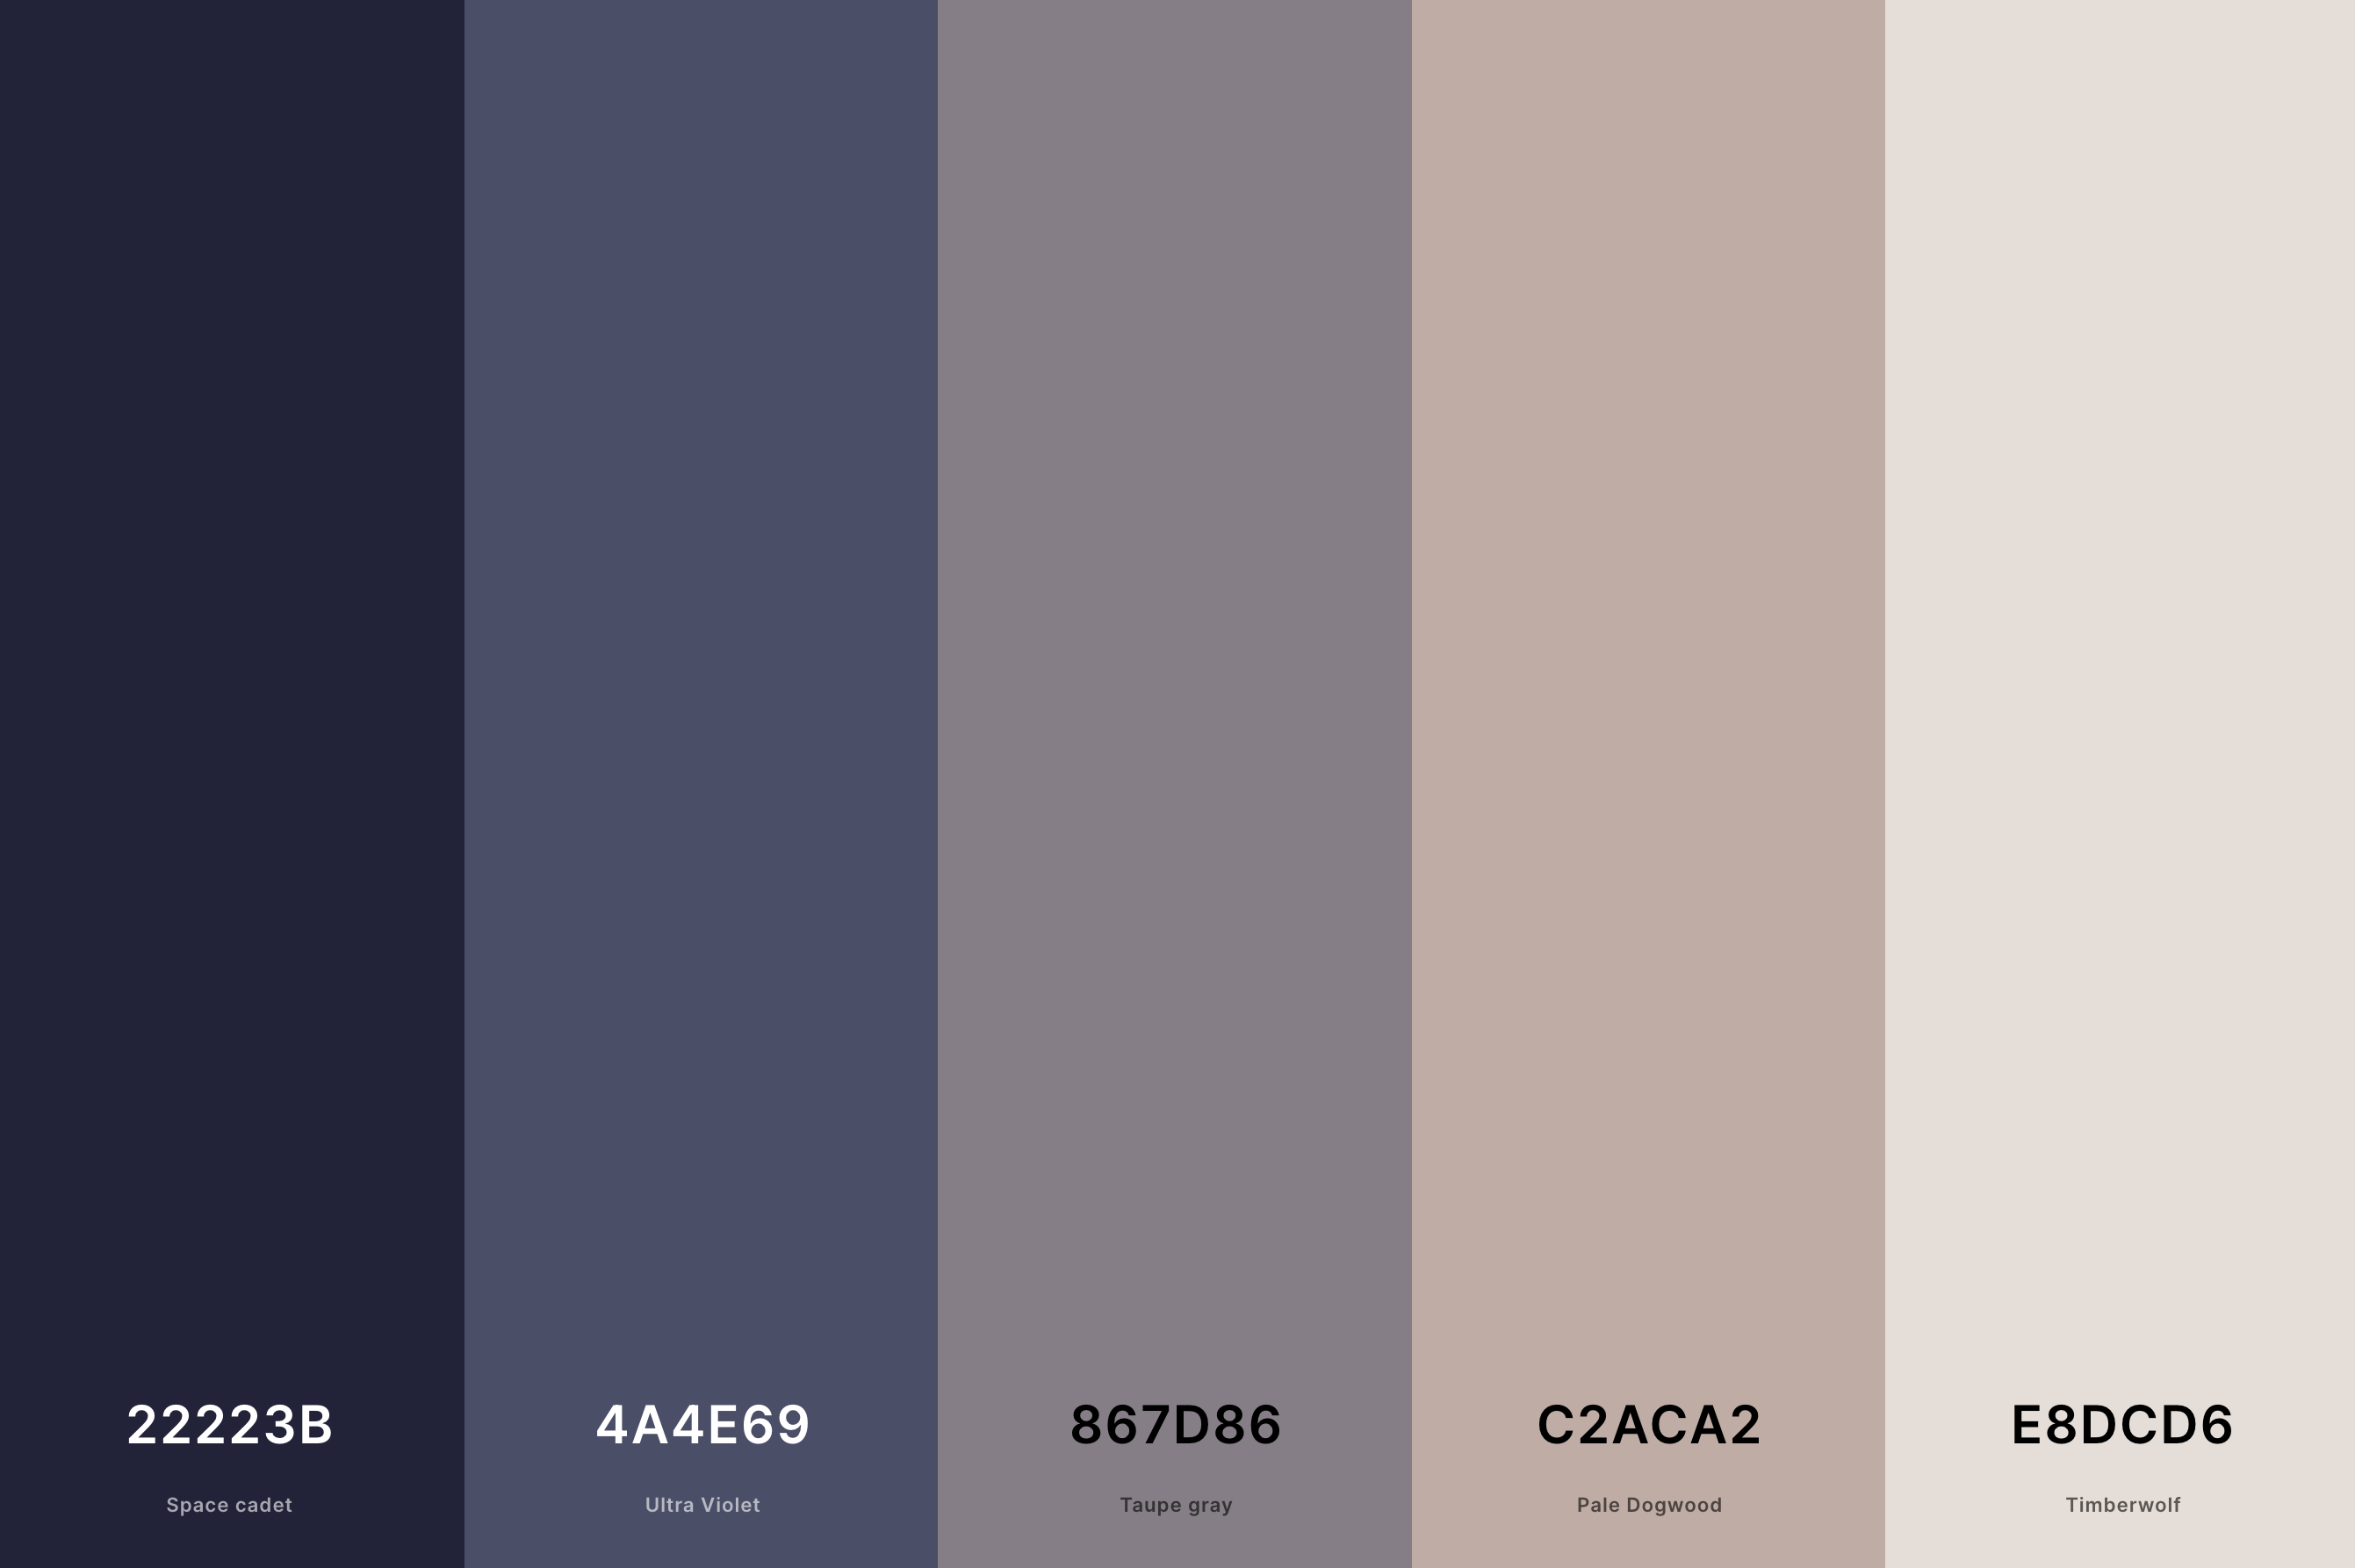 19. Aesthetic Tan Color Palette Color Palette with Space Cadet (Hex #22223B) + Ultra Violet (Hex #4A4E69) + Taupe Gray (Hex #867D86) + Pale Dogwood (Hex #C2ACA2) + Timberwolf (Hex #E8DCD6) Color Palette with Hex Codes